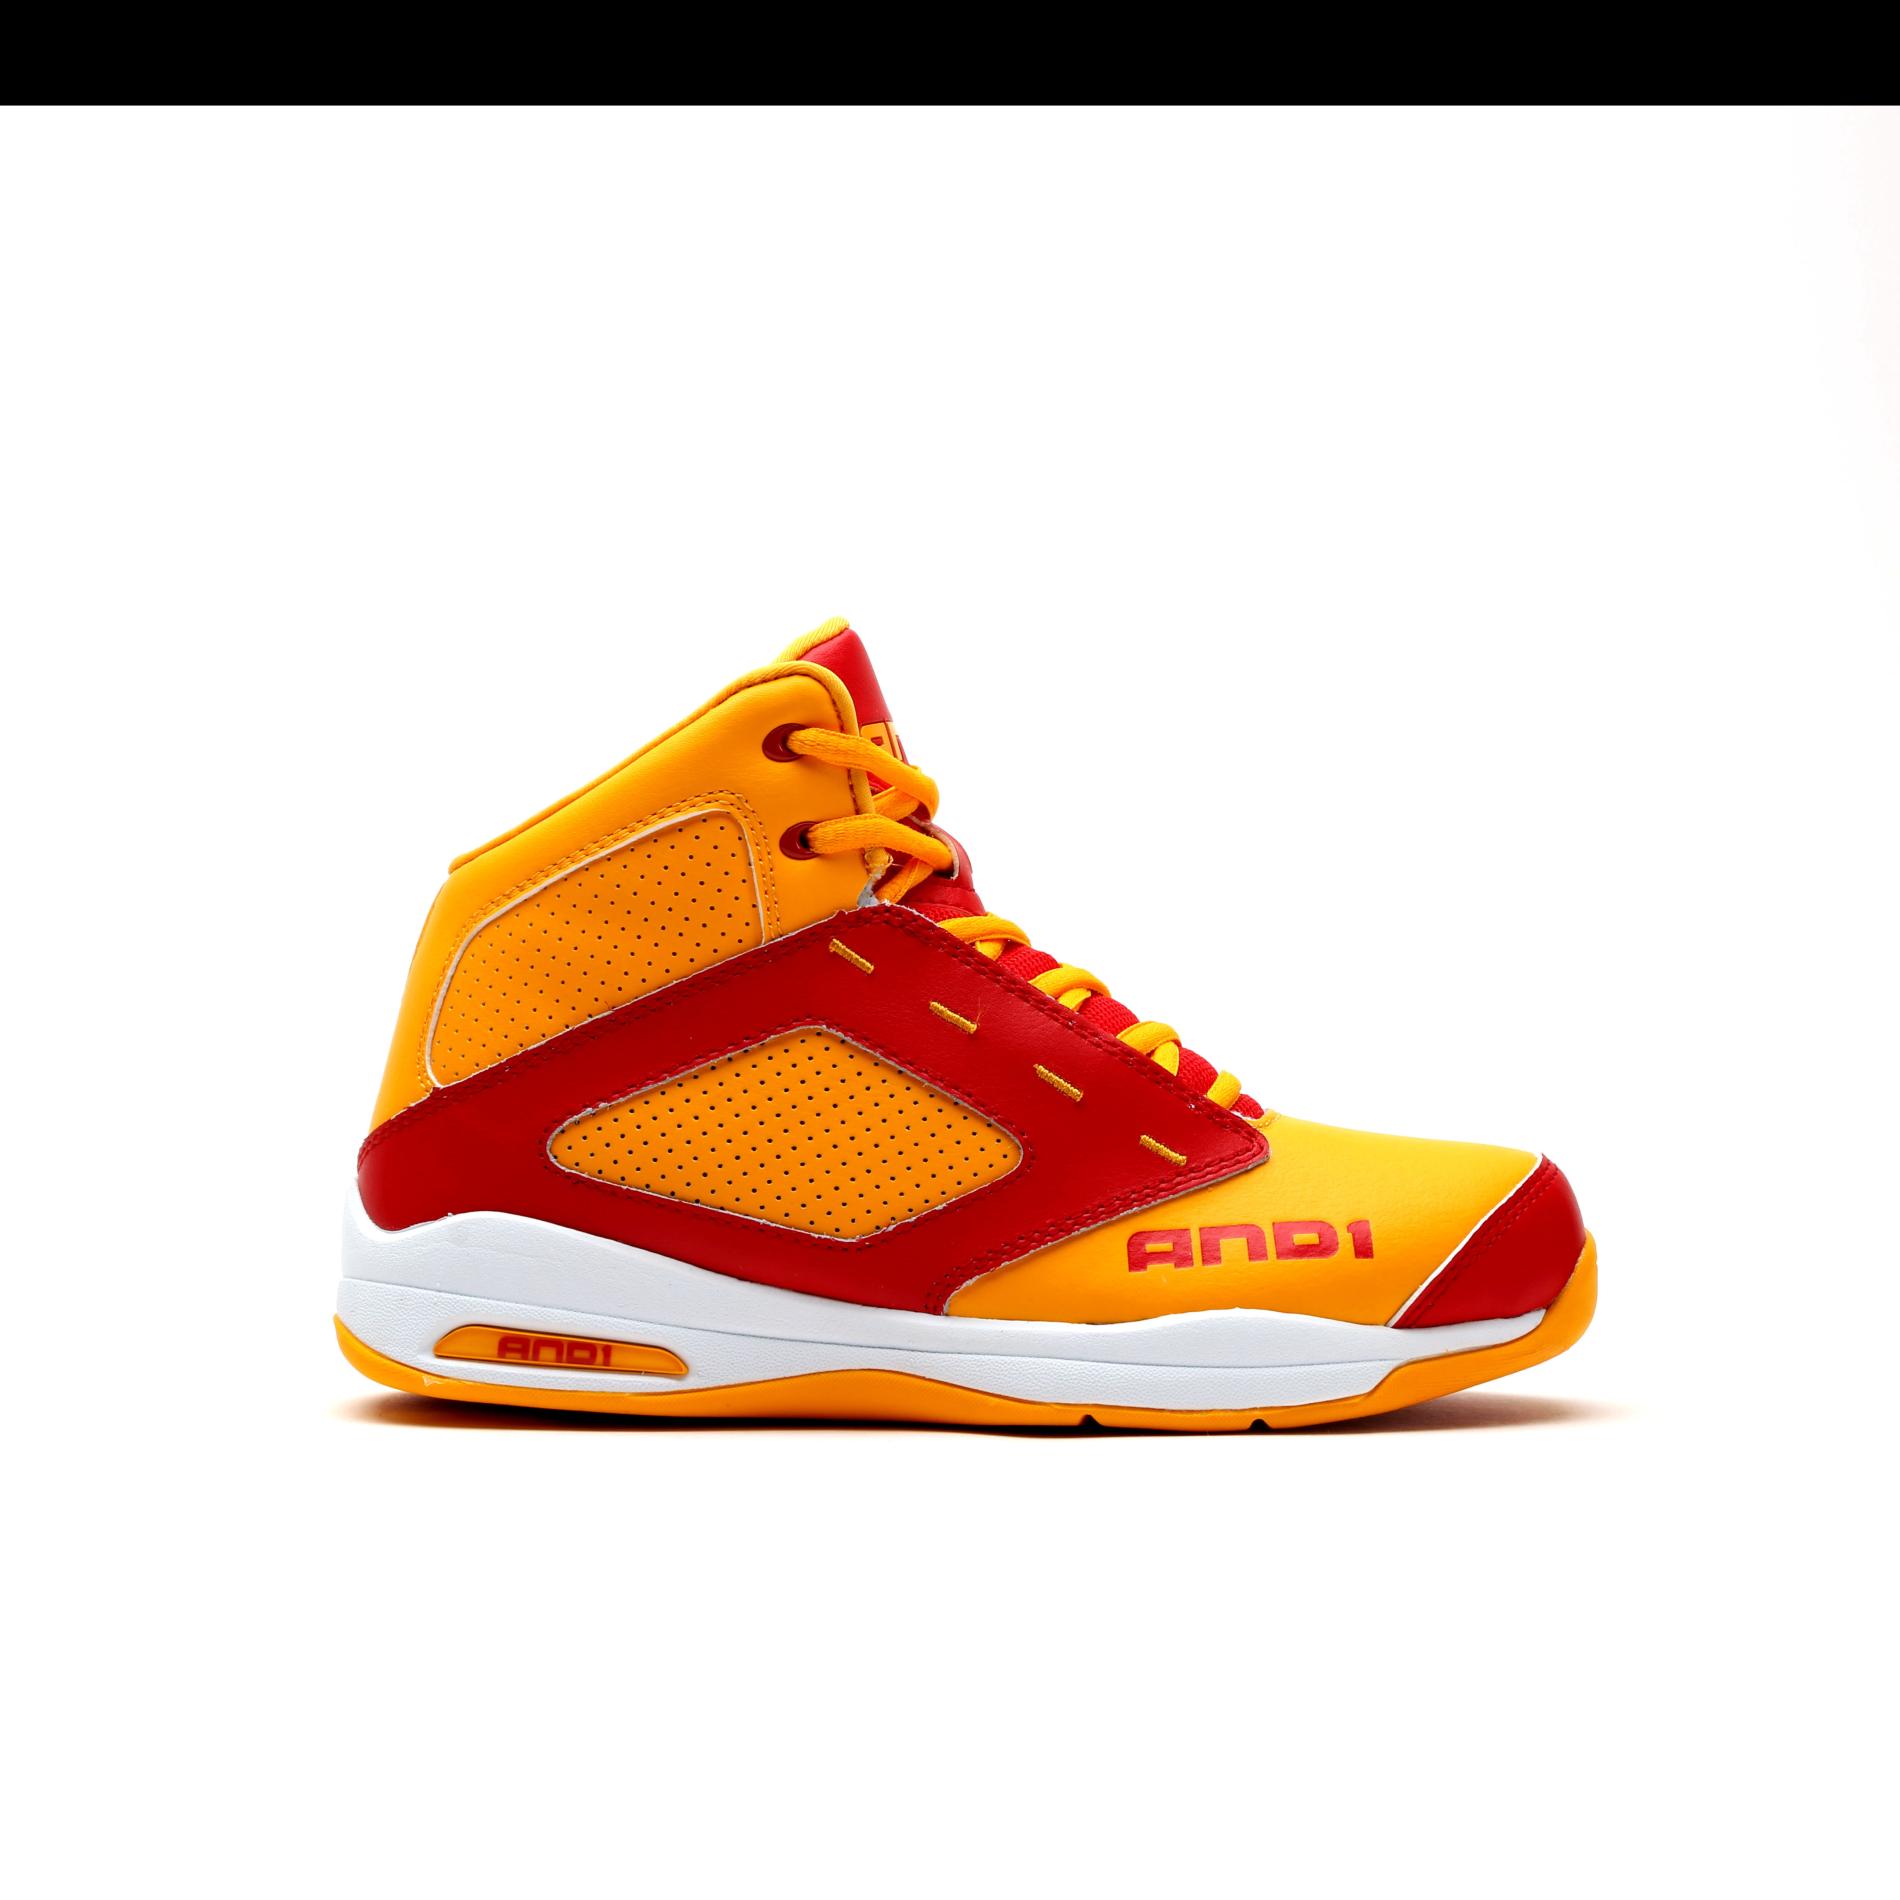 AND 1 Boy's Typhoon Yellow/Red High-Top Athletic Shoe